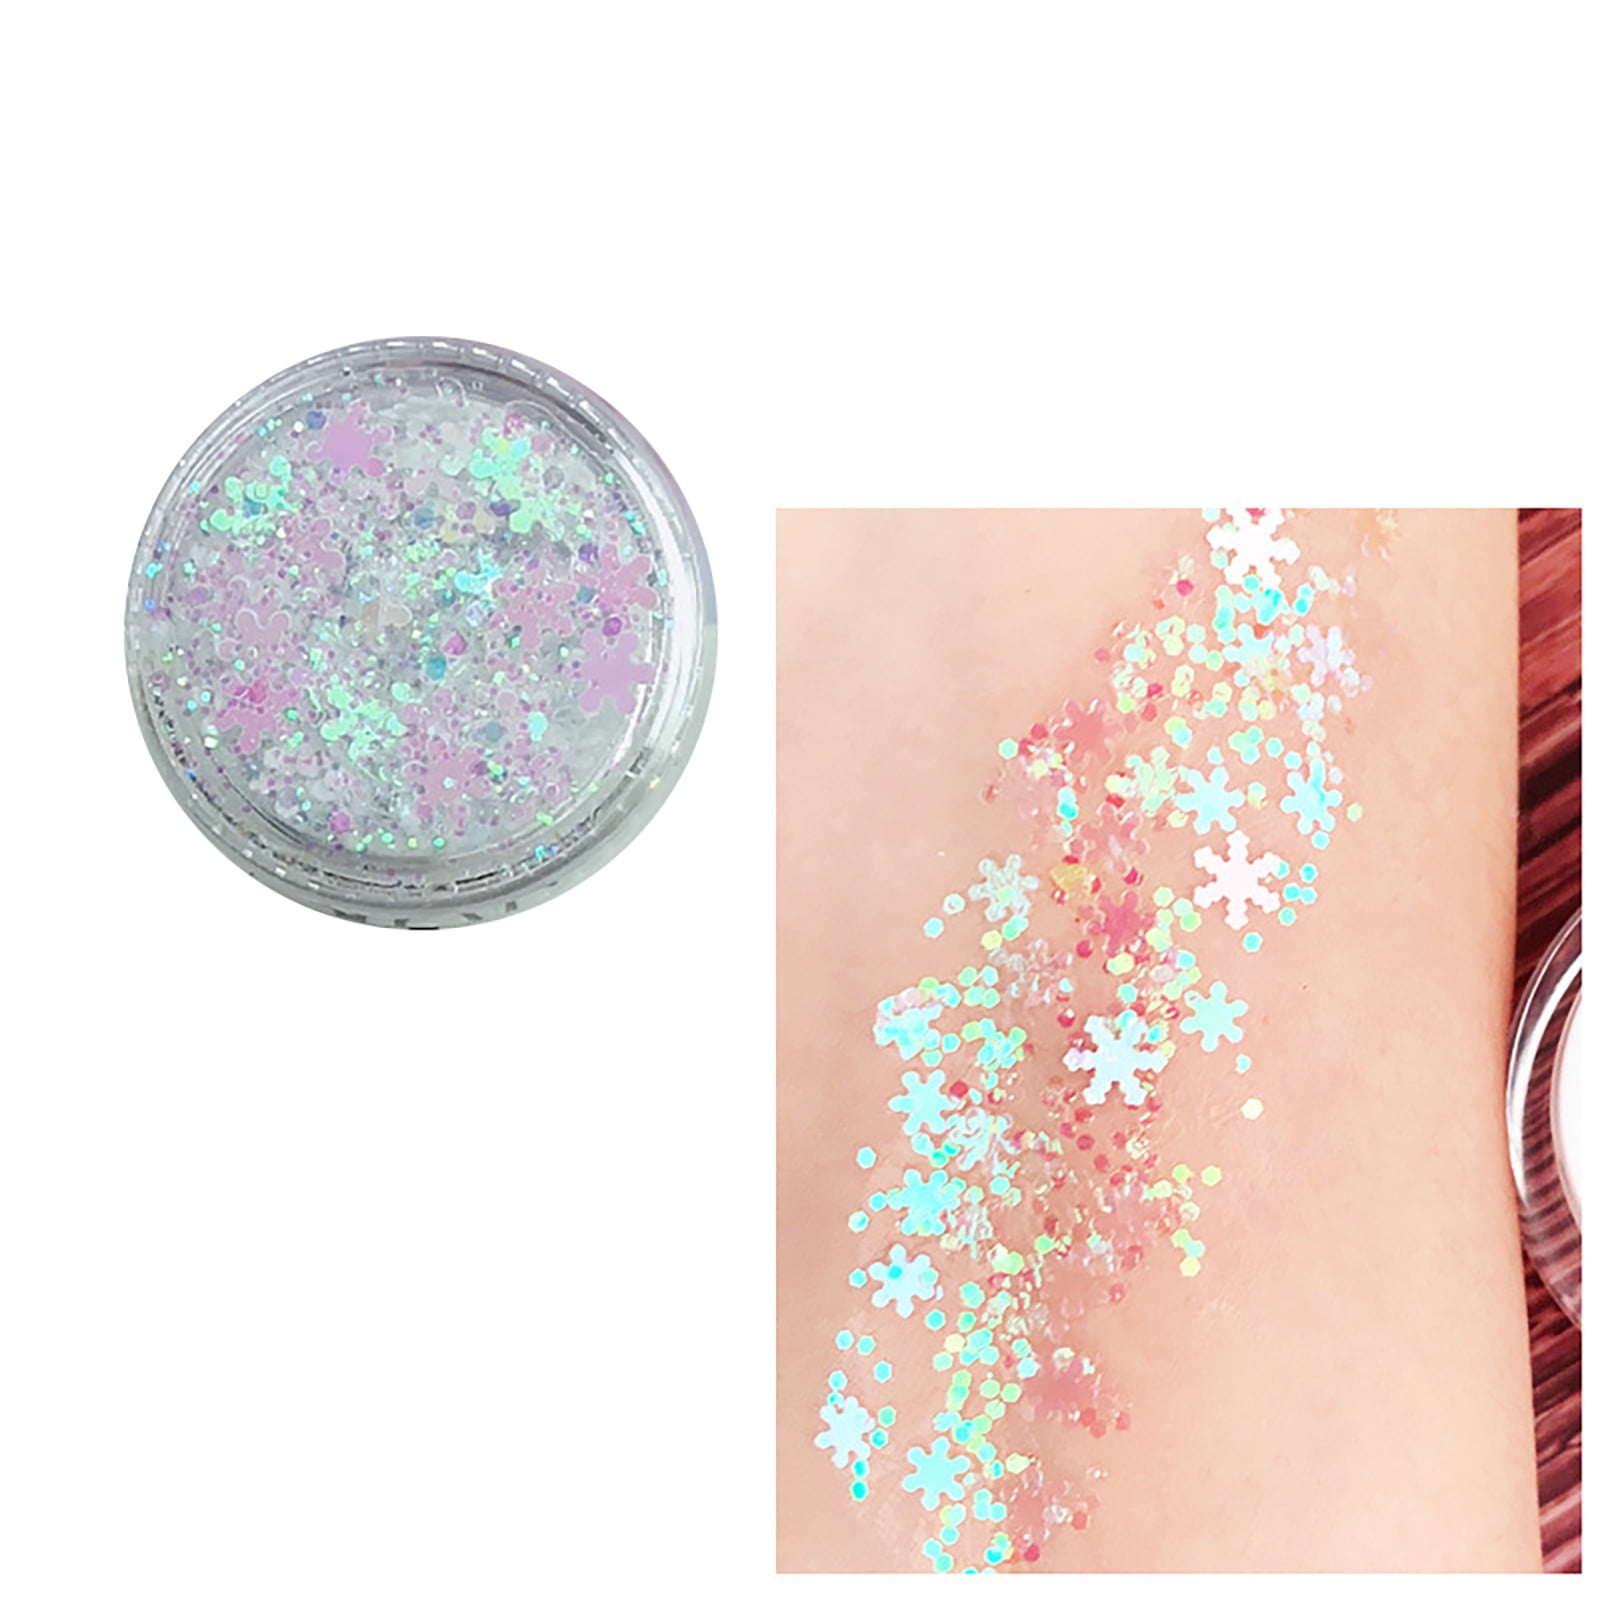 Paminify White Face Glitter Gel,Singer Concerts Music Festival Rave  Accessories,Mermaid Body Glitter Gel, Halloween Hair Sequins Face Glitter  Paint